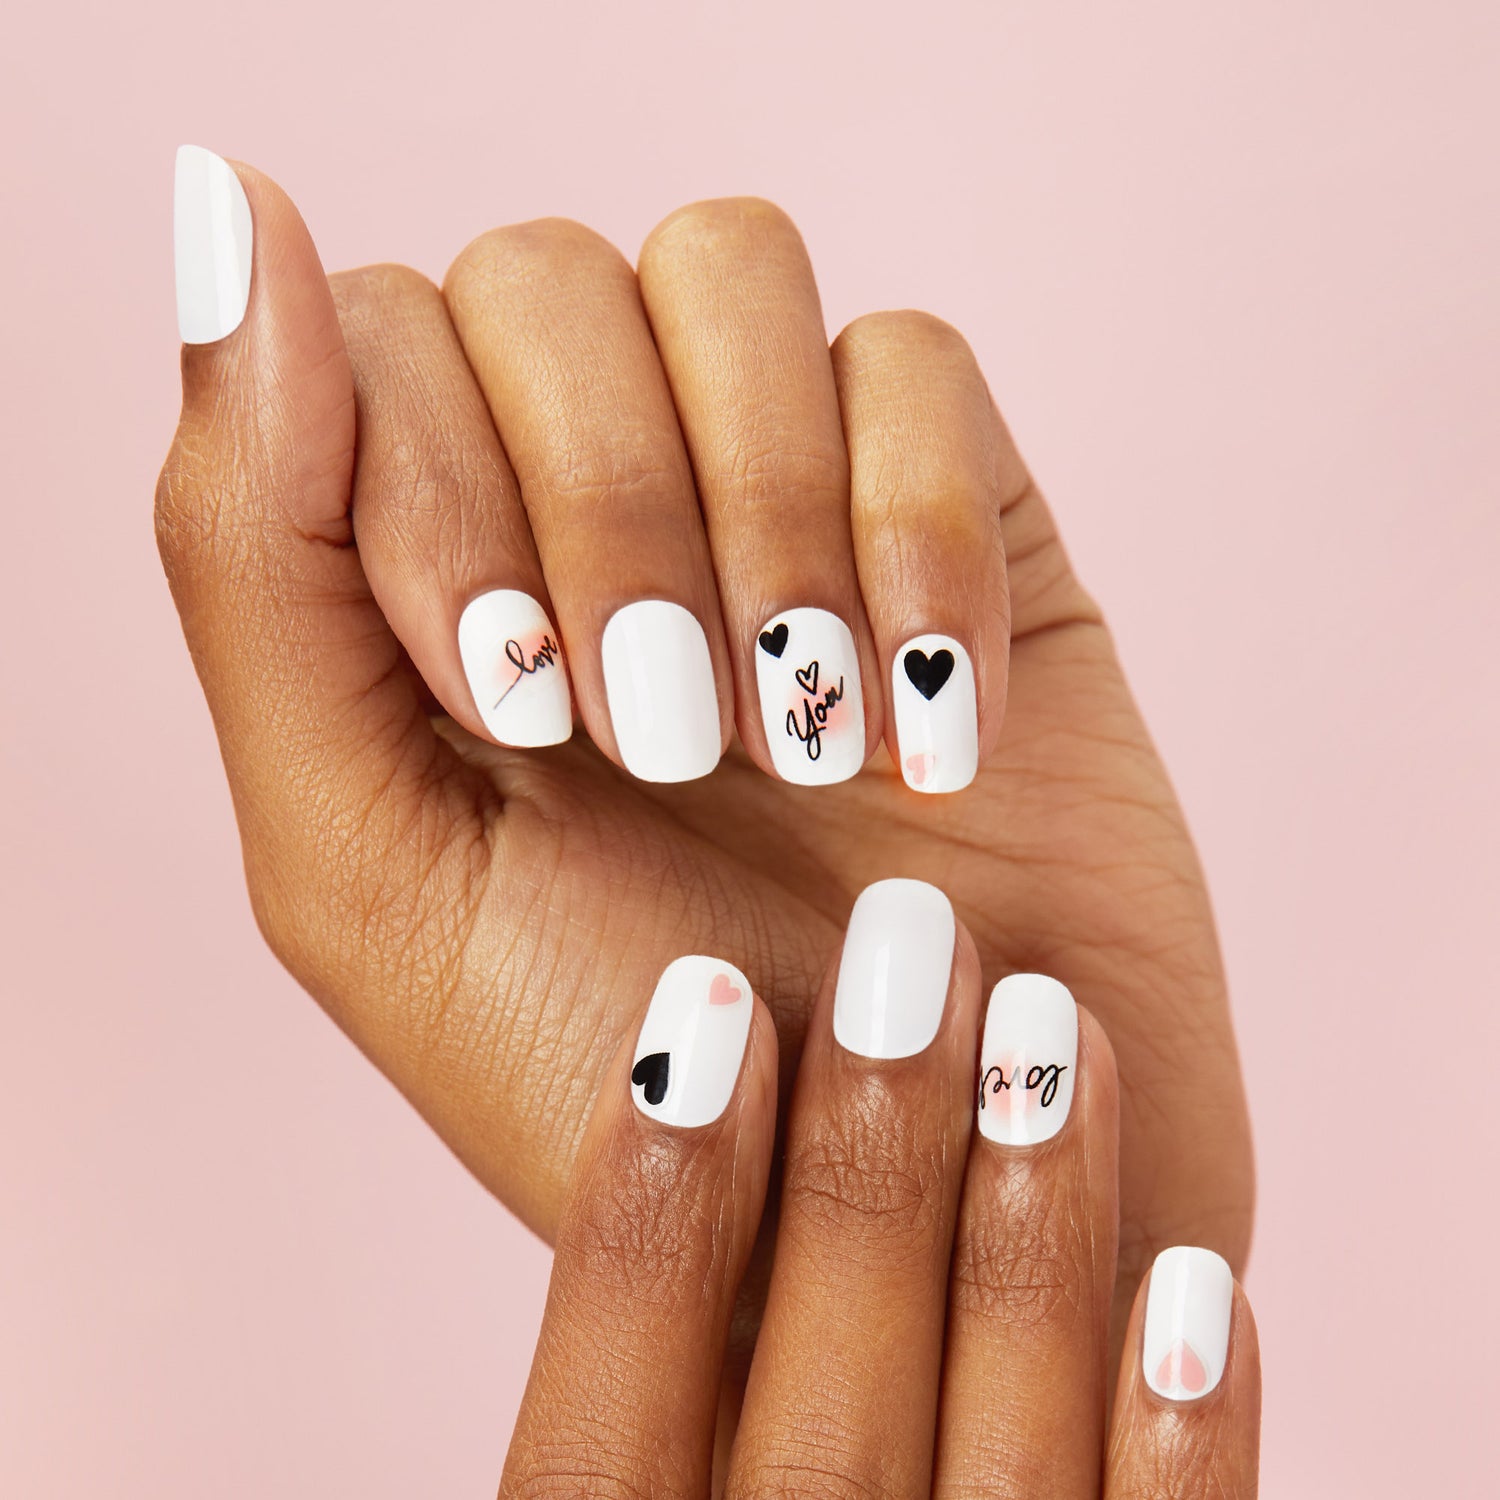 nail art stickers featuring expressive designs, including French tips with black and blush accents, glitter-filled hearts, and love notes.